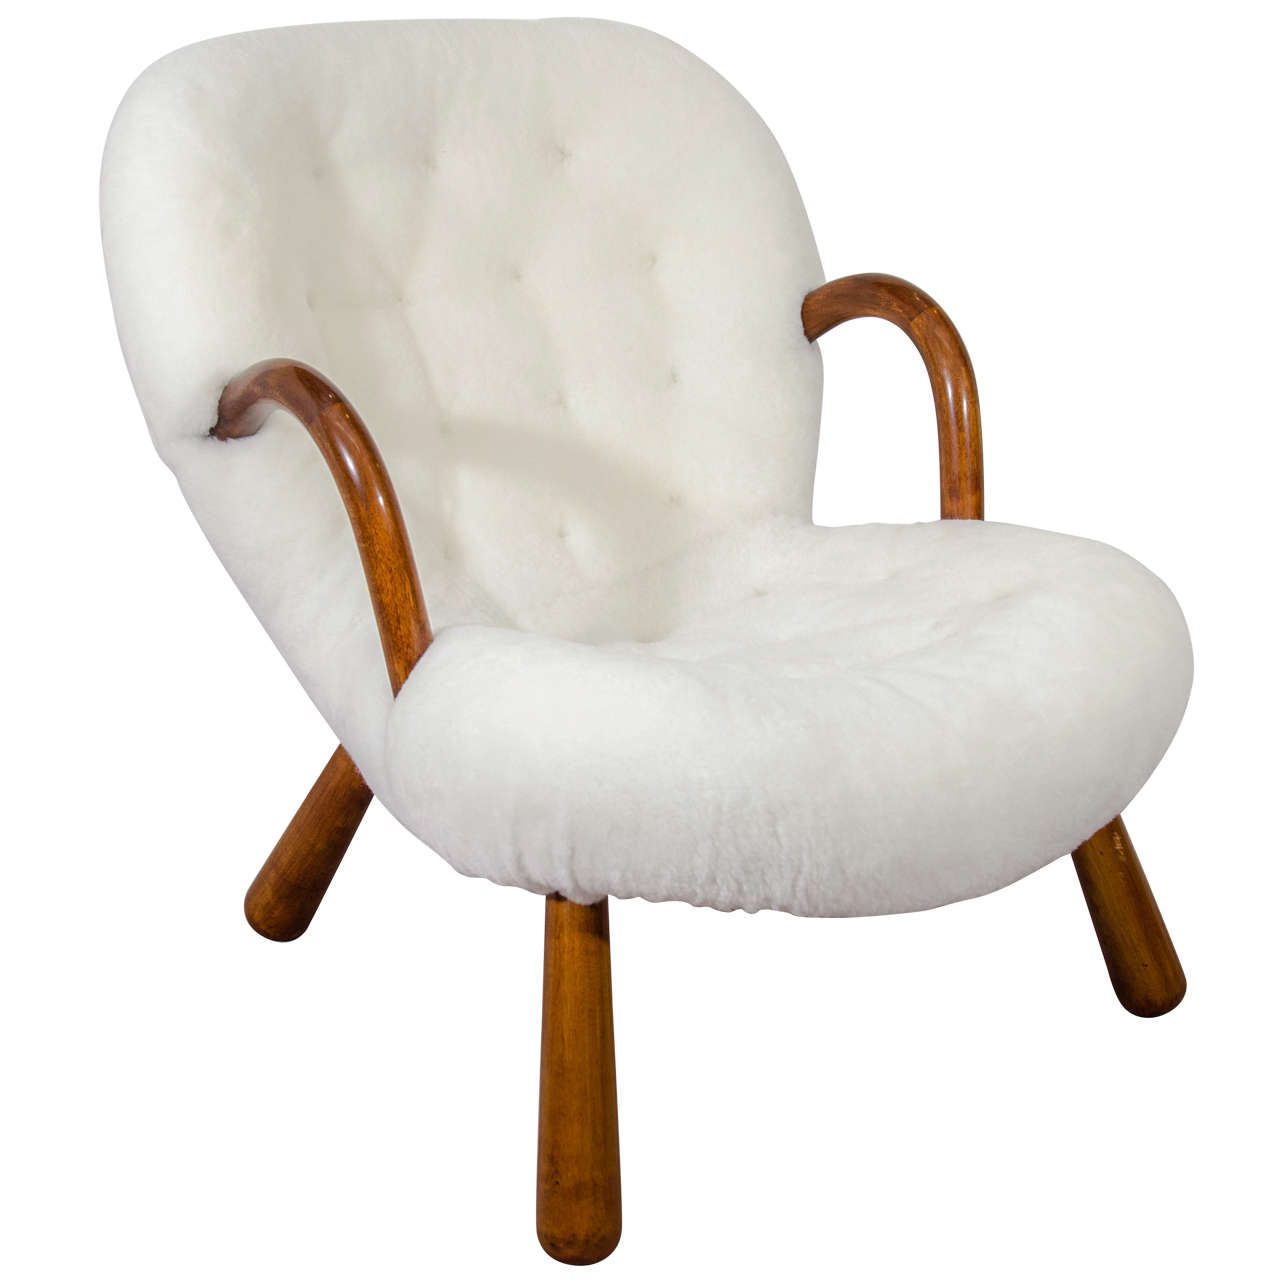 Midcentury "Clam" Chair by Philip Arctander (Formerly Martin Olsen)